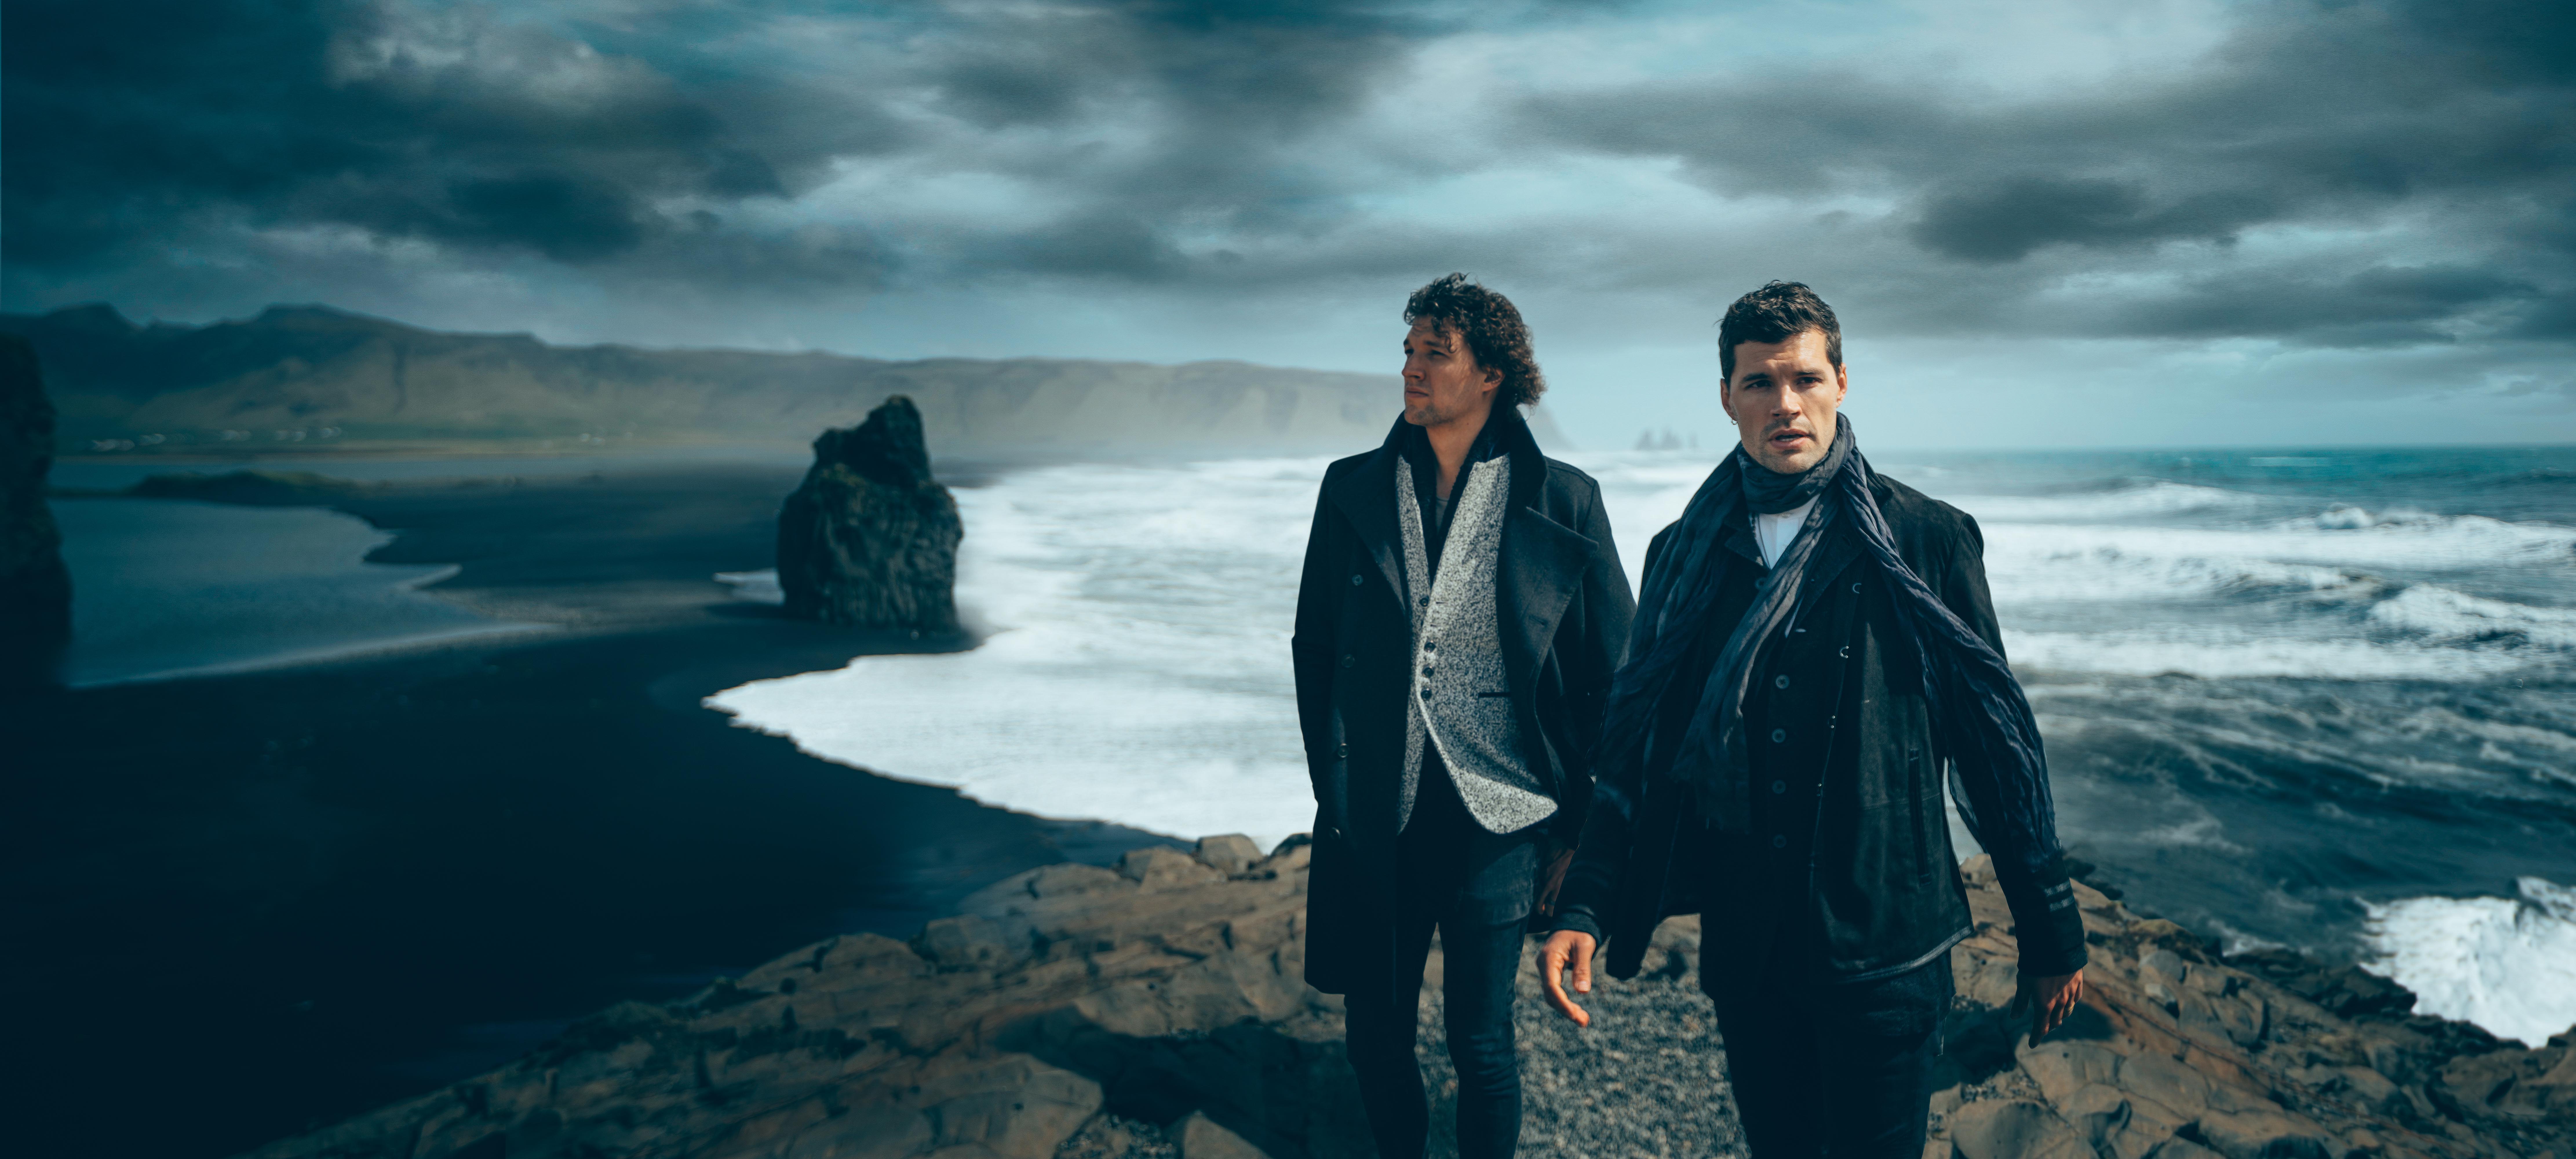 A Christmas treat from sibling duo For King & Country